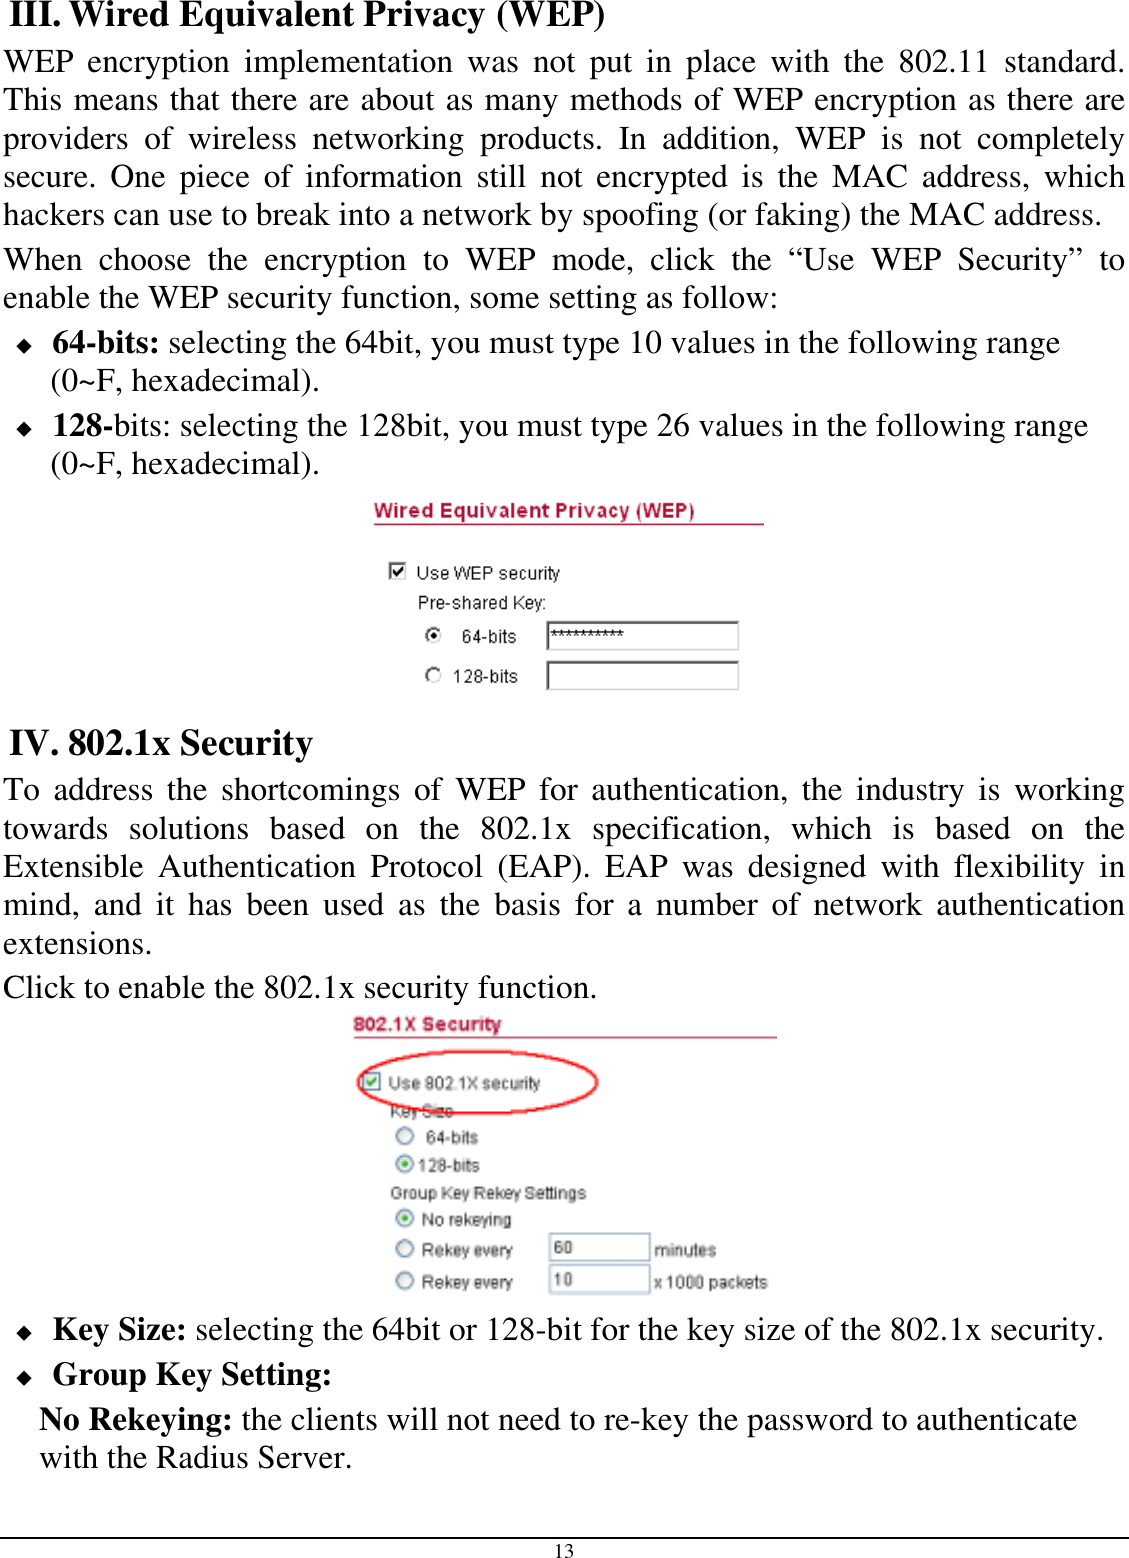  13 III. Wired Equivalent Privacy (WEP) WEP encryption implementation was not put in place with the 802.11 standard. This means that there are about as many methods of WEP encryption as there are providers of wireless networking products. In addition, WEP is not completely secure. One piece of information still not encrypted is the MAC address, which hackers can use to break into a network by spoofing (or faking) the MAC address.  When choose the encryption to WEP mode, click the “Use WEP Security” to enable the WEP security function, some setting as follow:  64-bits: selecting the 64bit, you must type 10 values in the following range (0~F, hexadecimal).   128-bits: selecting the 128bit, you must type 26 values in the following range (0~F, hexadecimal).  IV. 802.1x Security To address the shortcomings of WEP for authentication, the industry is working towards solutions based on the 802.1x specification, which is based on the Extensible Authentication Protocol (EAP). EAP was designed with flexibility in mind, and it has been used as the basis for a number of network authentication extensions. Click to enable the 802.1x security function.   Key Size: selecting the 64bit or 128-bit for the key size of the 802.1x security.  Group Key Setting: No Rekeying: the clients will not need to re-key the password to authenticate with the Radius Server. 